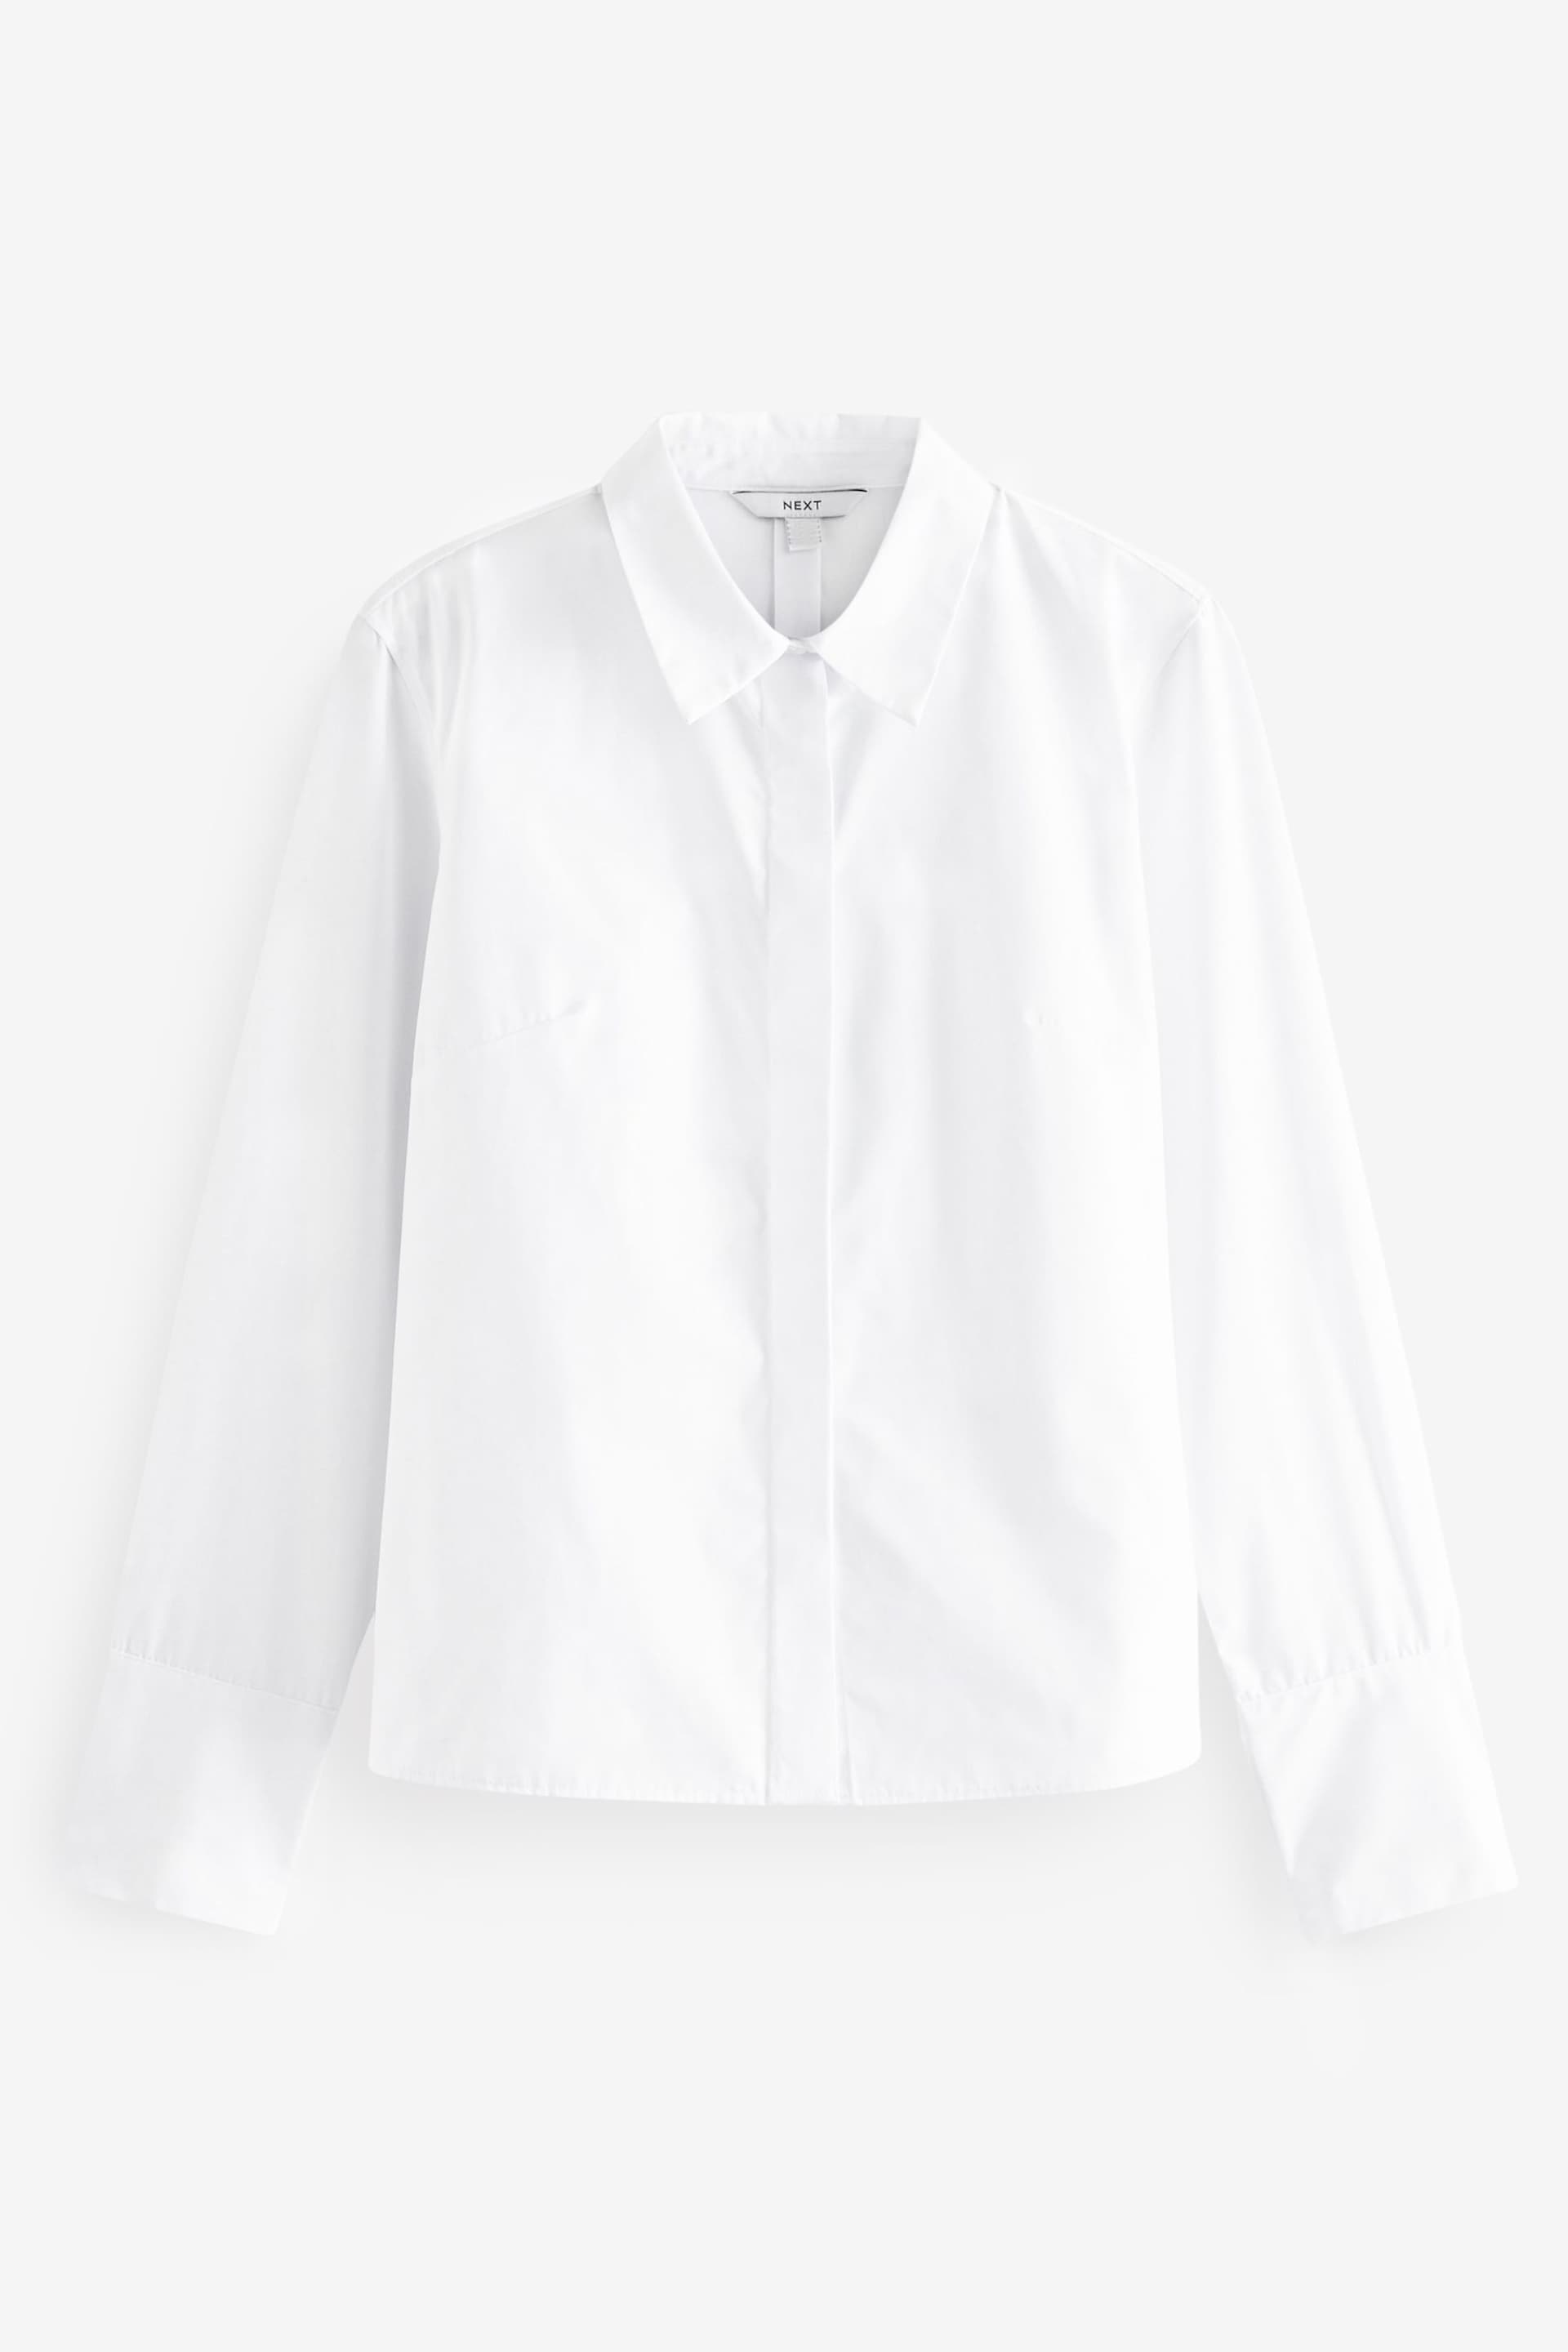 White Fitted Collared Long Sleeve Shirt - Image 6 of 7